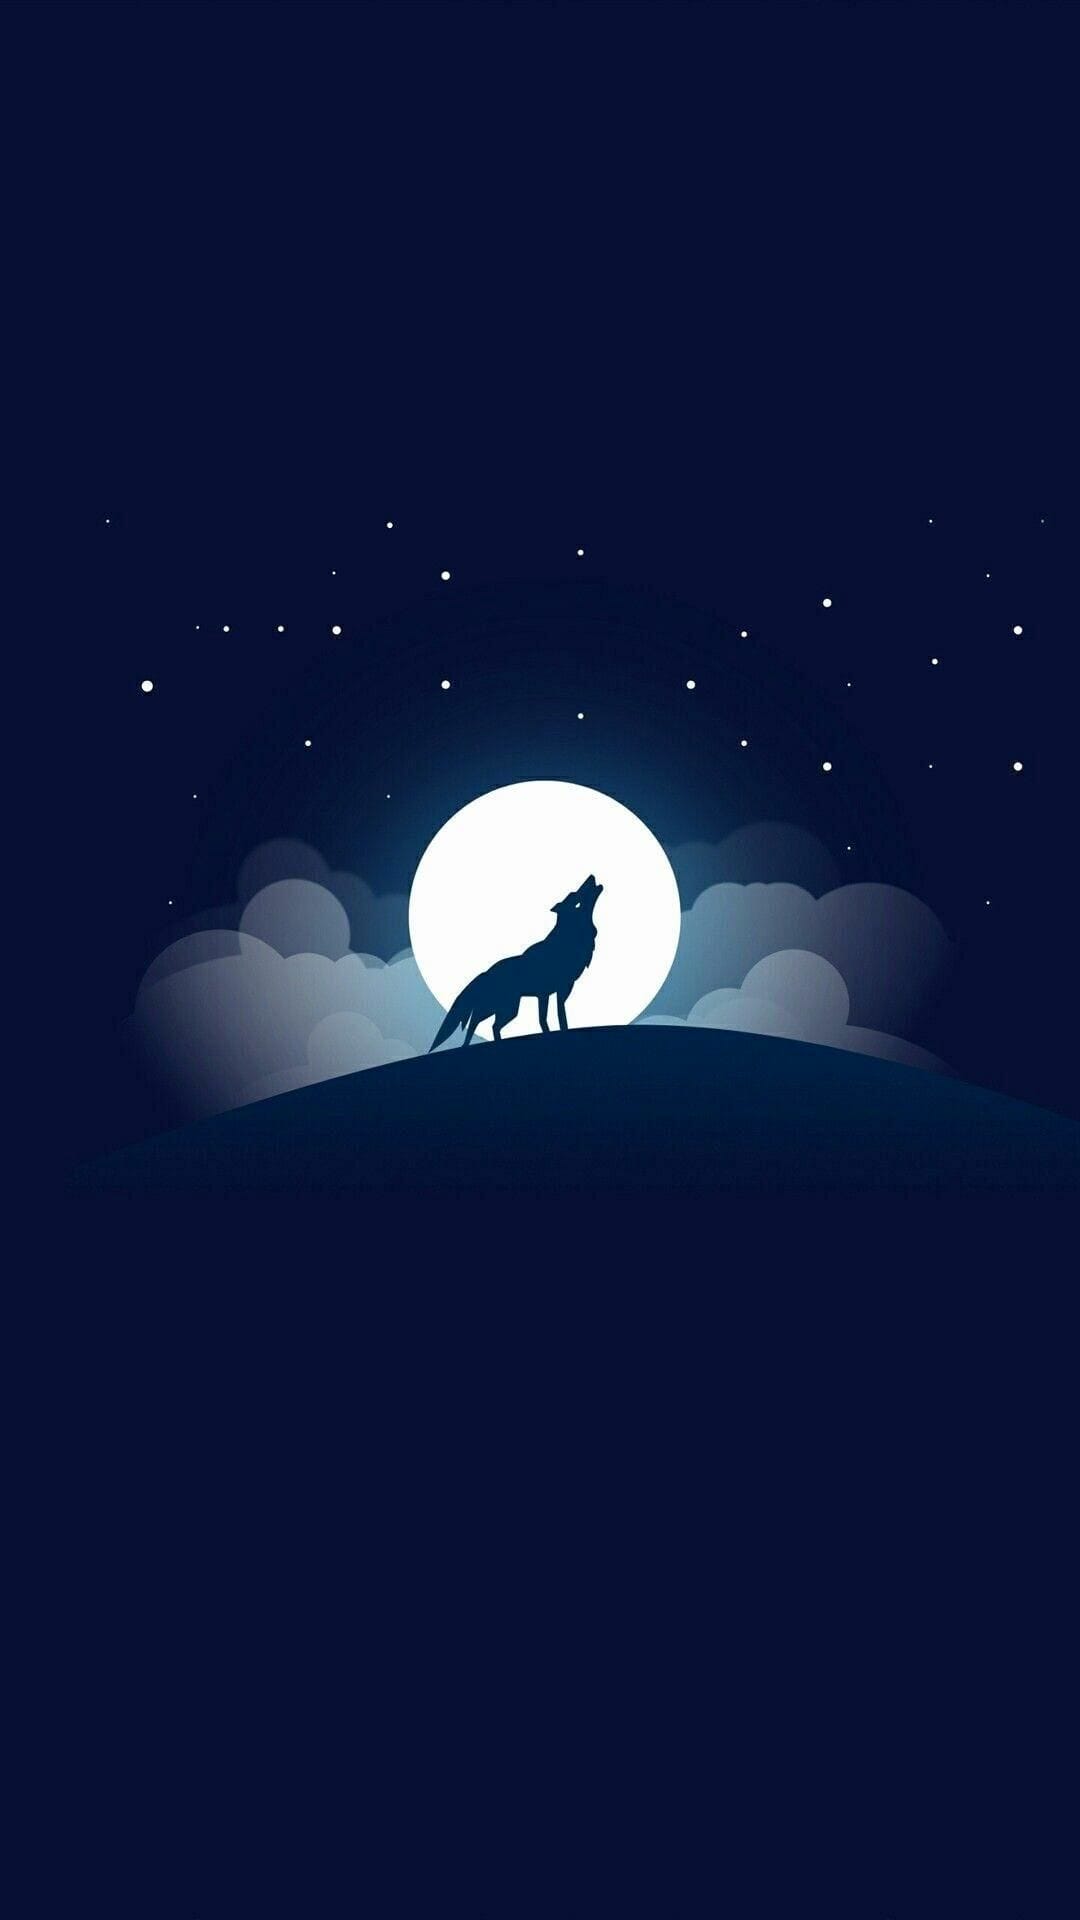 My New Minimalist Wolf Wallpaper (not by me), MobileWallpaper / iPhone HD Wallpaper Background Download HD Wallpaper (Desktop Background / Android / iPhone) (1080p, 4k) (1080x1920) (2021)